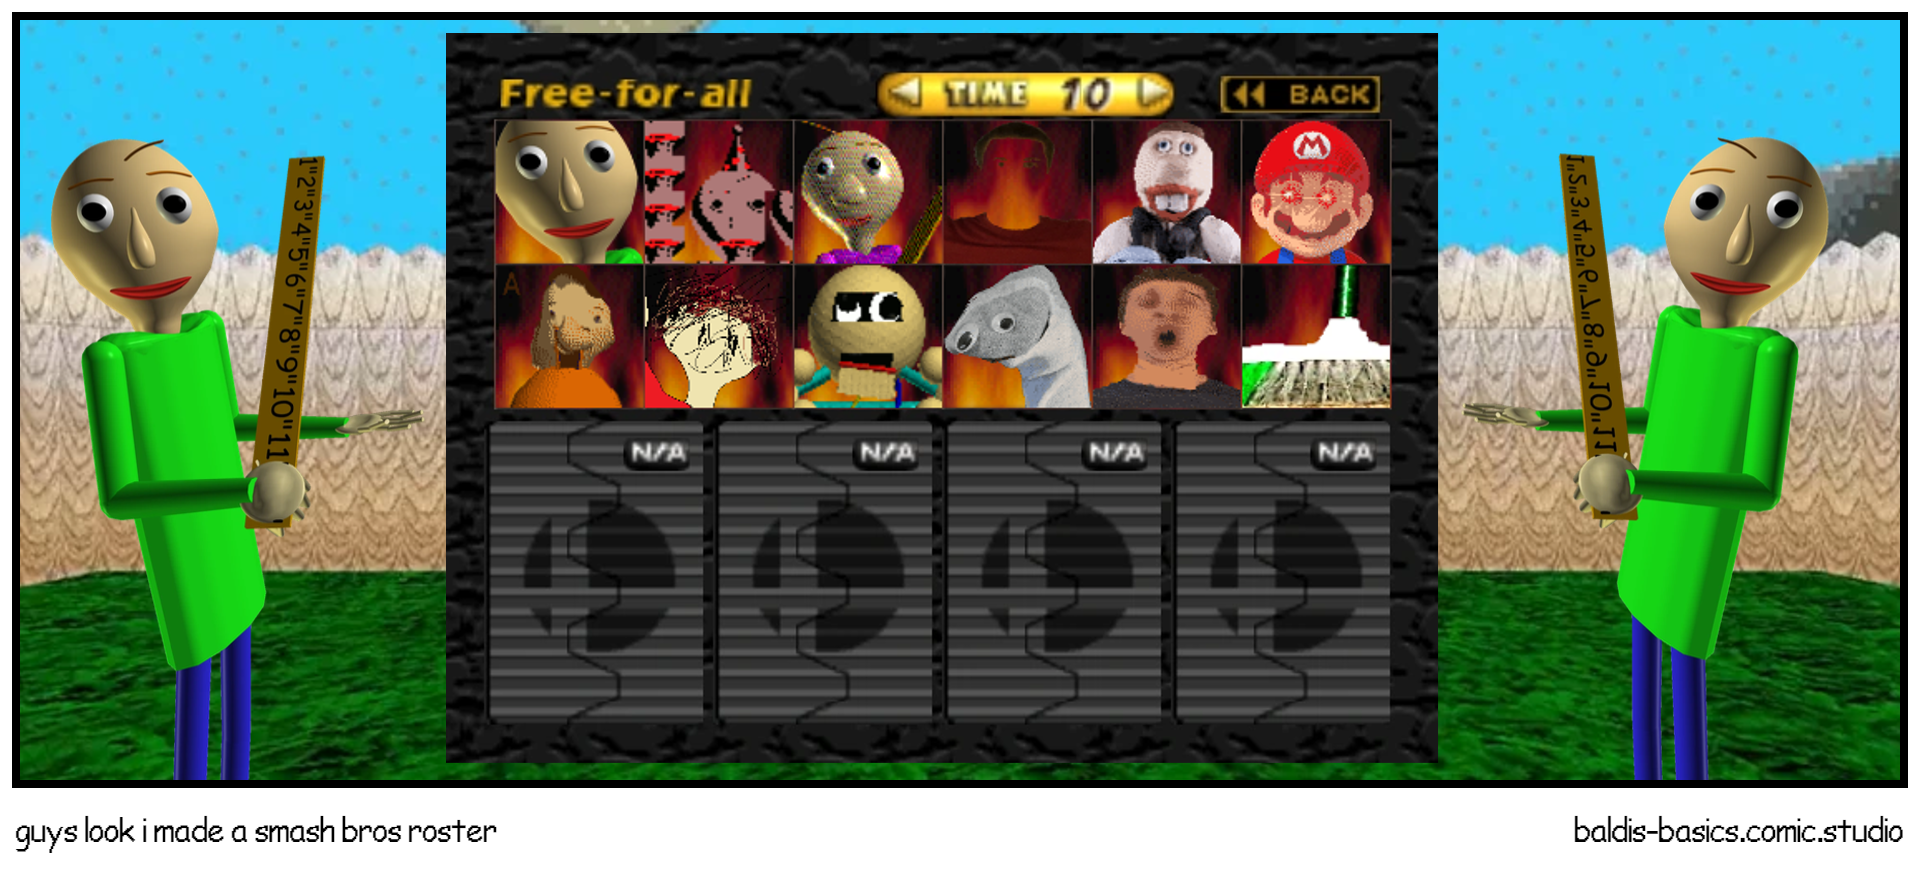 guys look i made a smash bros roster